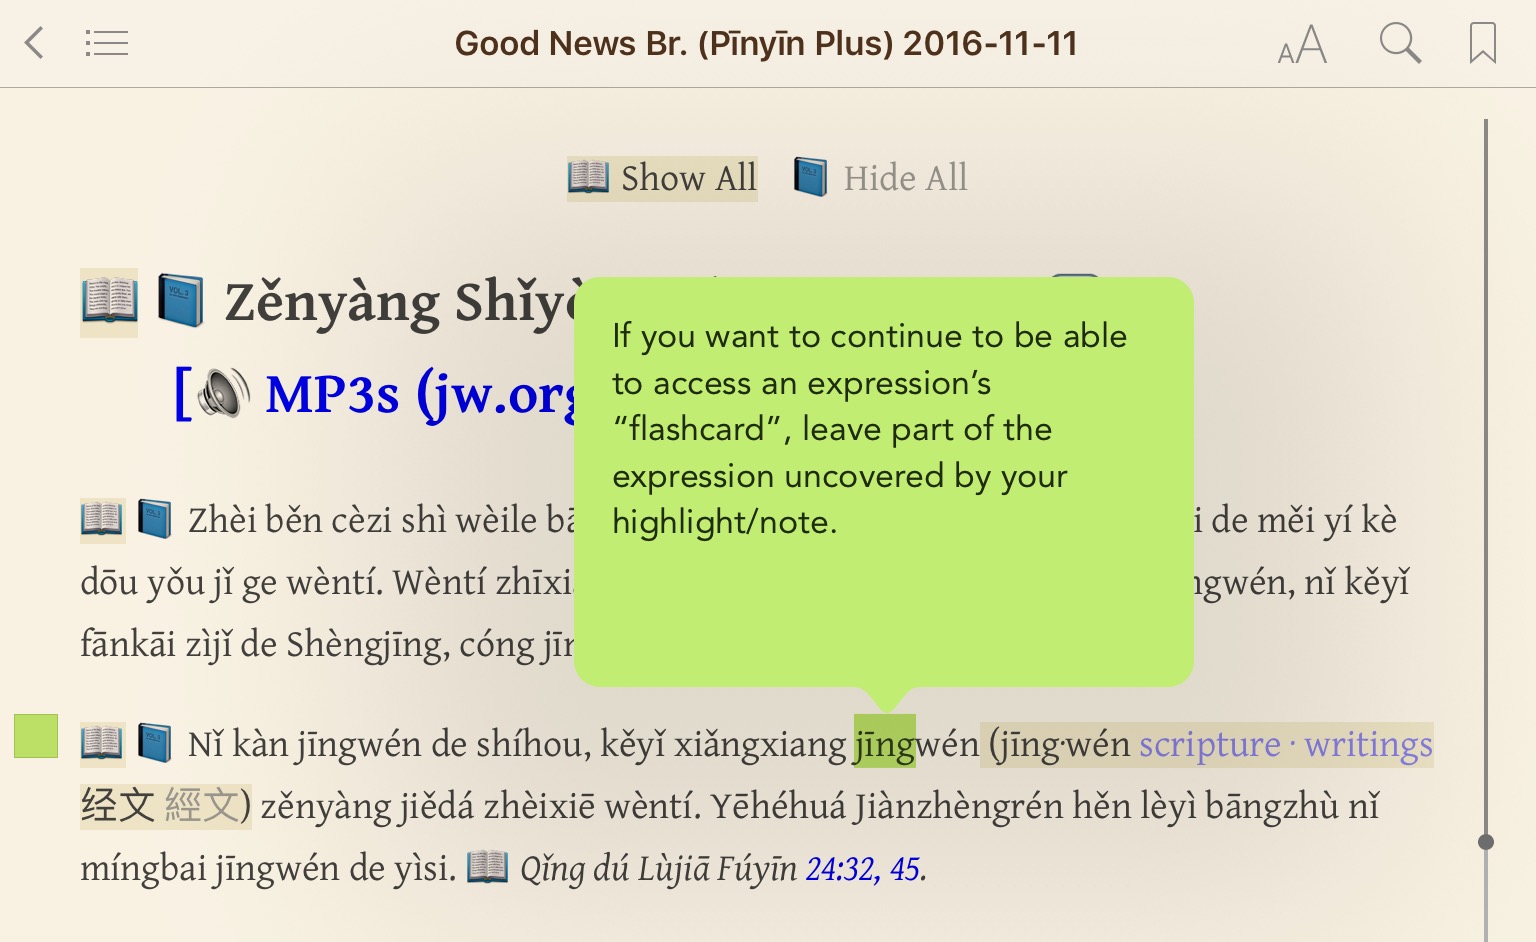 iBooks Annotations and Pīnyīn Plus